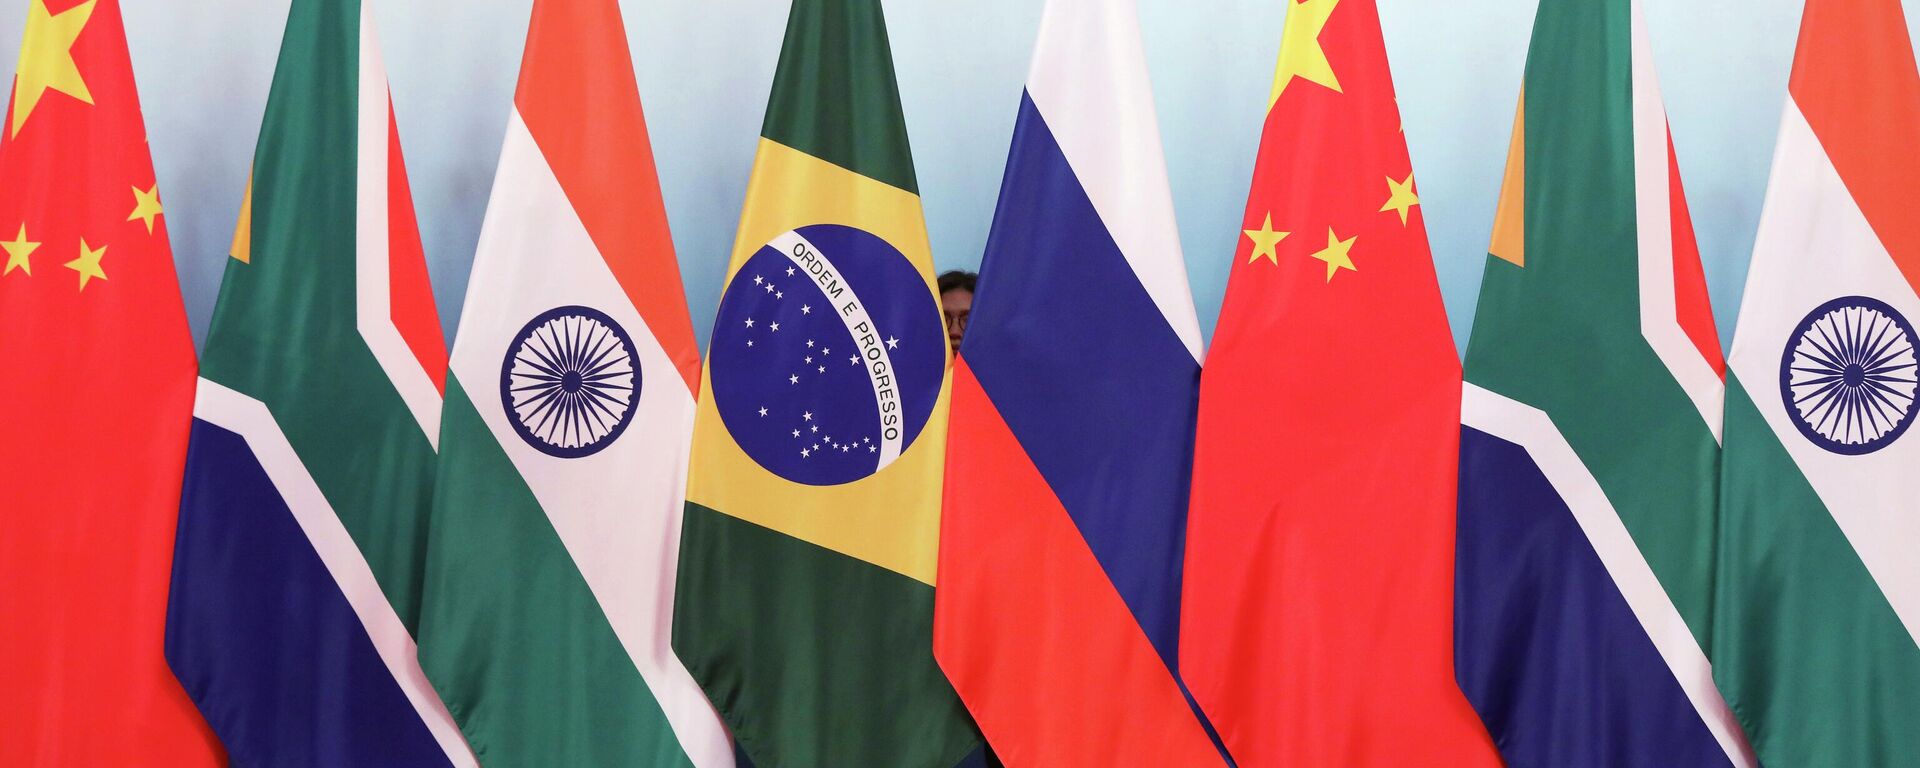 Staff worker stands behind national flags of Brazil, Russia, China, South Africa and India to tidy the flags ahead of a group photo during the BRICS Summit at the Xiamen International Conference and Exhibition Center in Xiamen, southeastern China's Fujian Province, Monday, Sept. 4, 2017. - Sputnik International, 1920, 28.11.2022